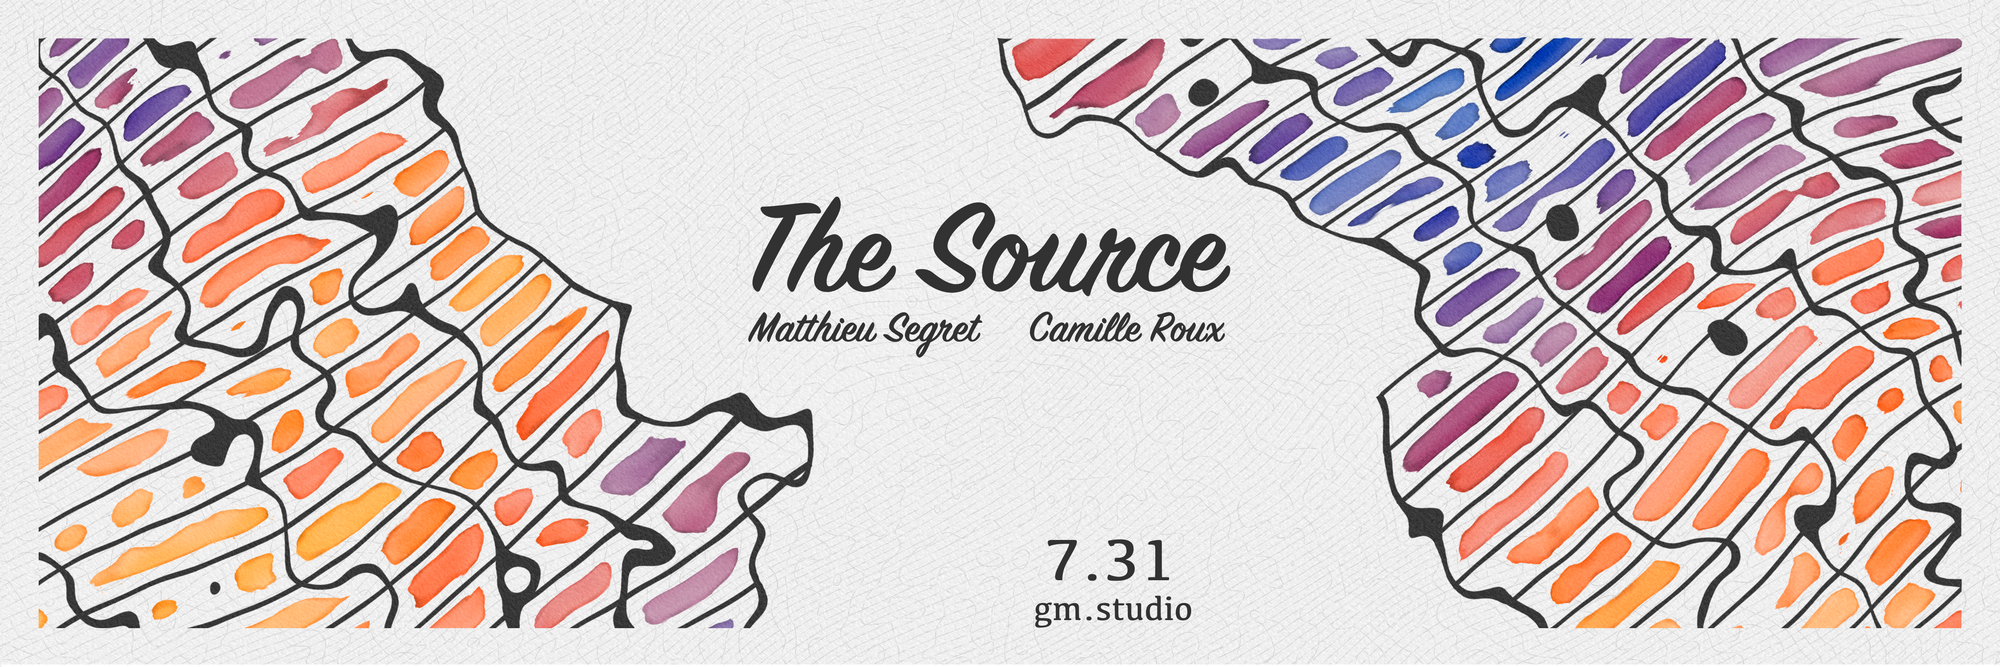 The story behind The Source